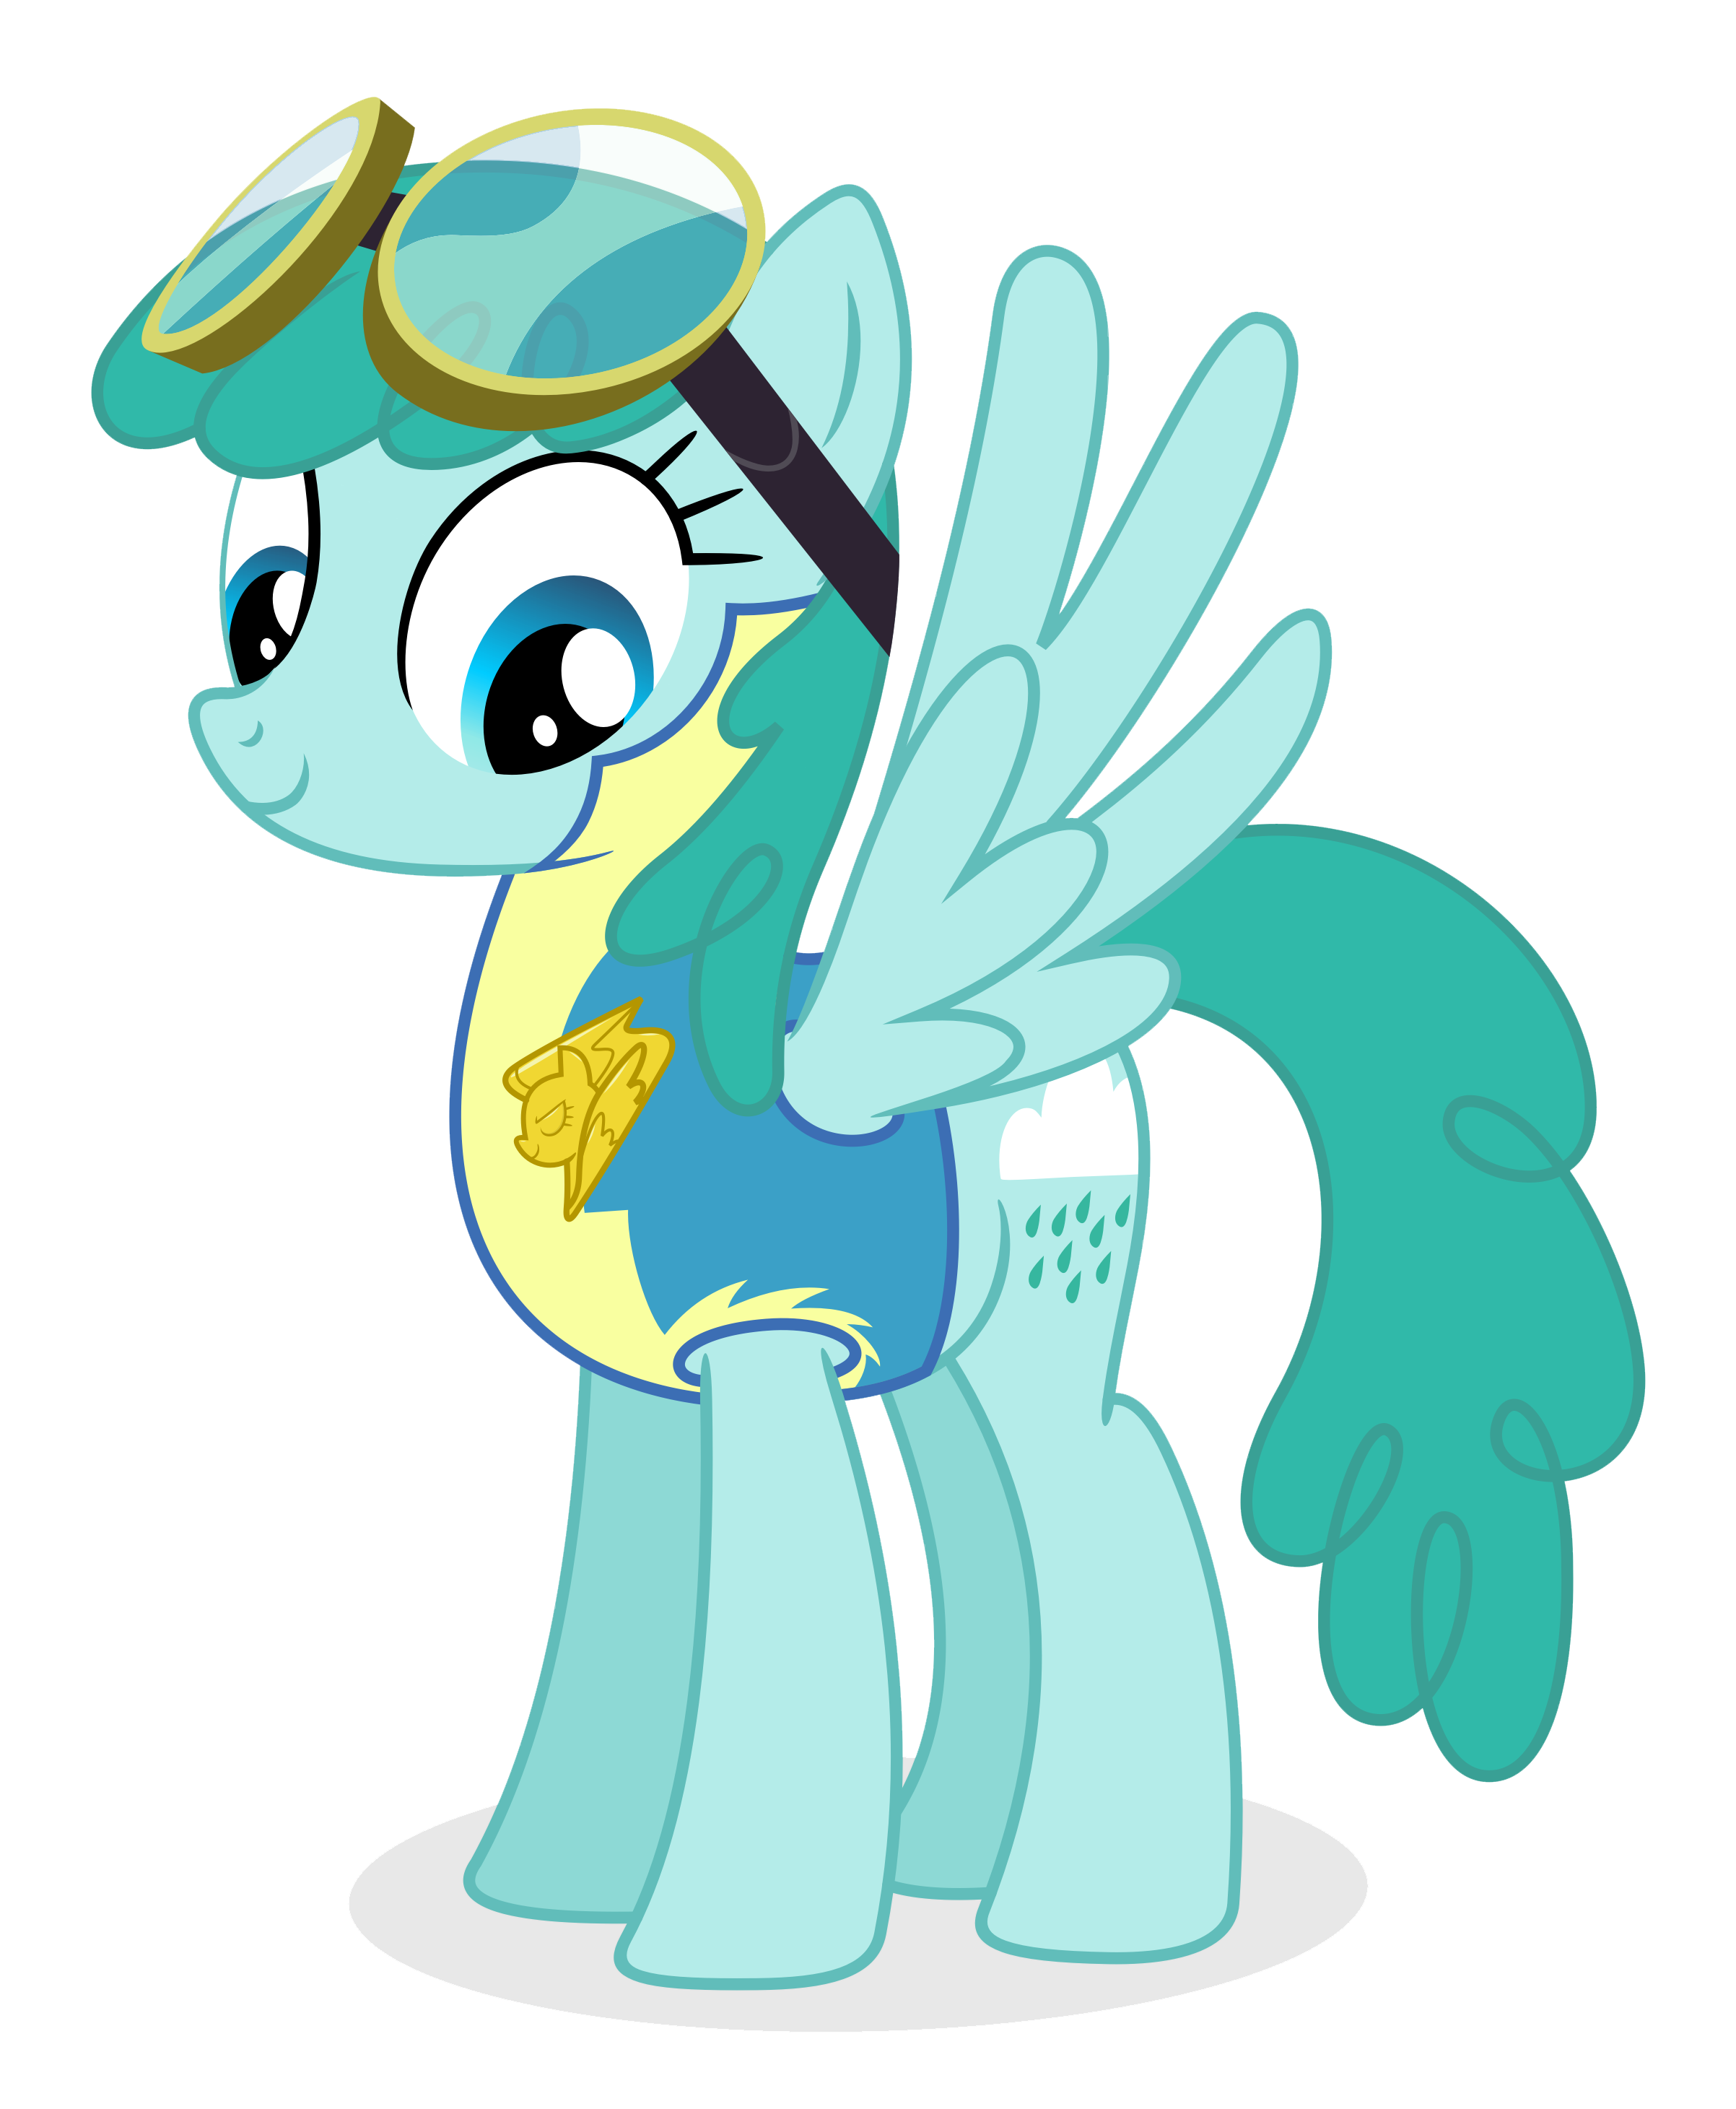 Medley as a lead pony in the academy